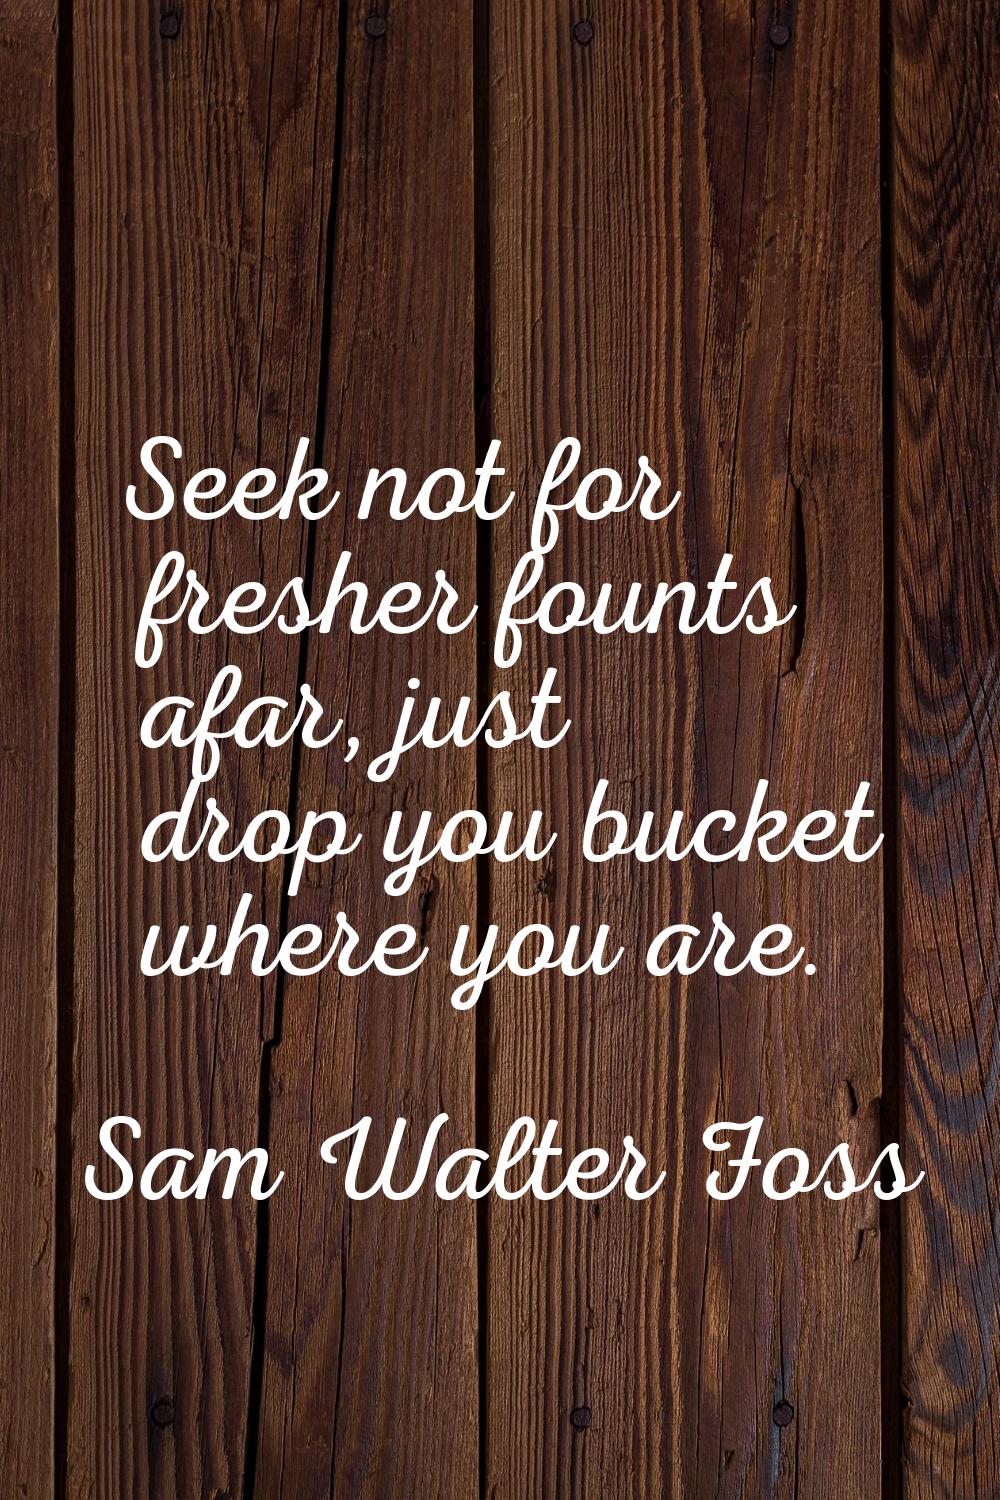 Seek not for fresher founts afar, just drop you bucket where you are.